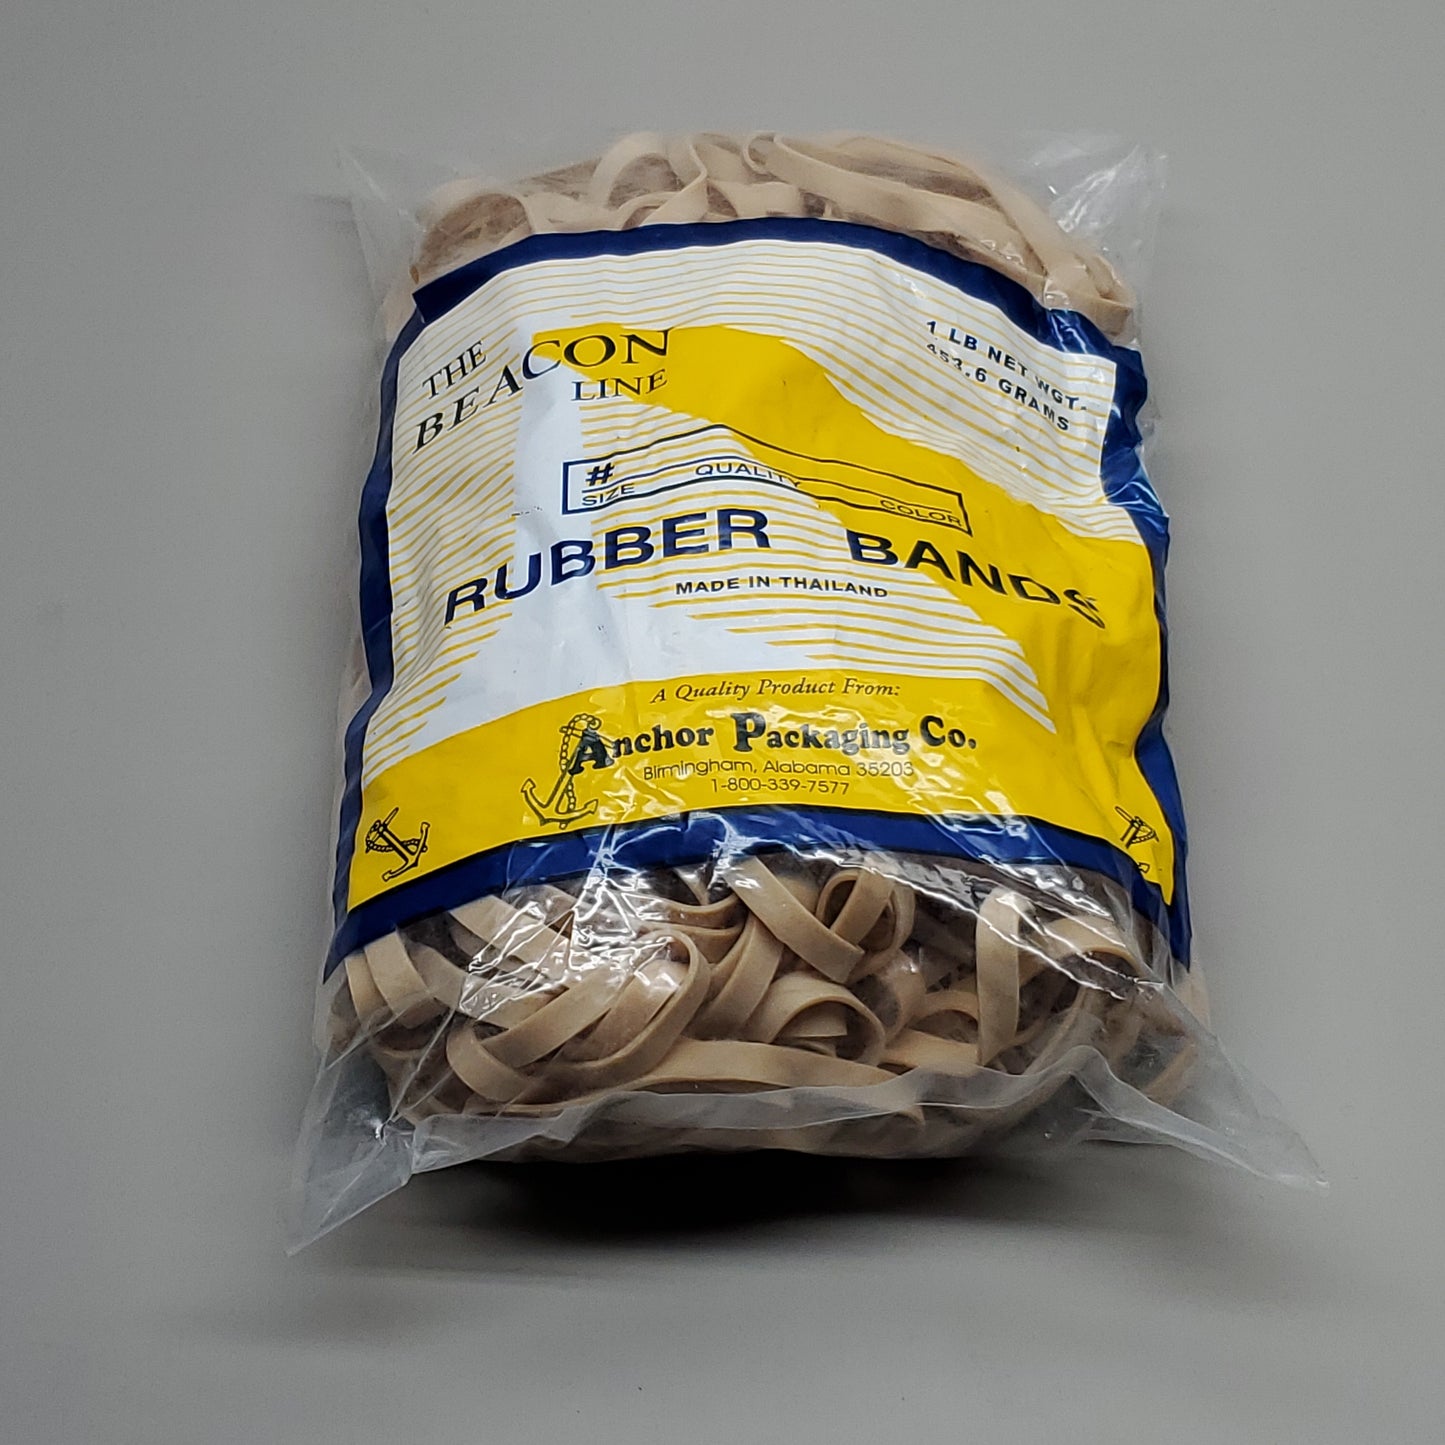 ANCHOR PACKAGING CO The Beacon Line Rubber Bands 1 lb Size 64 (New)